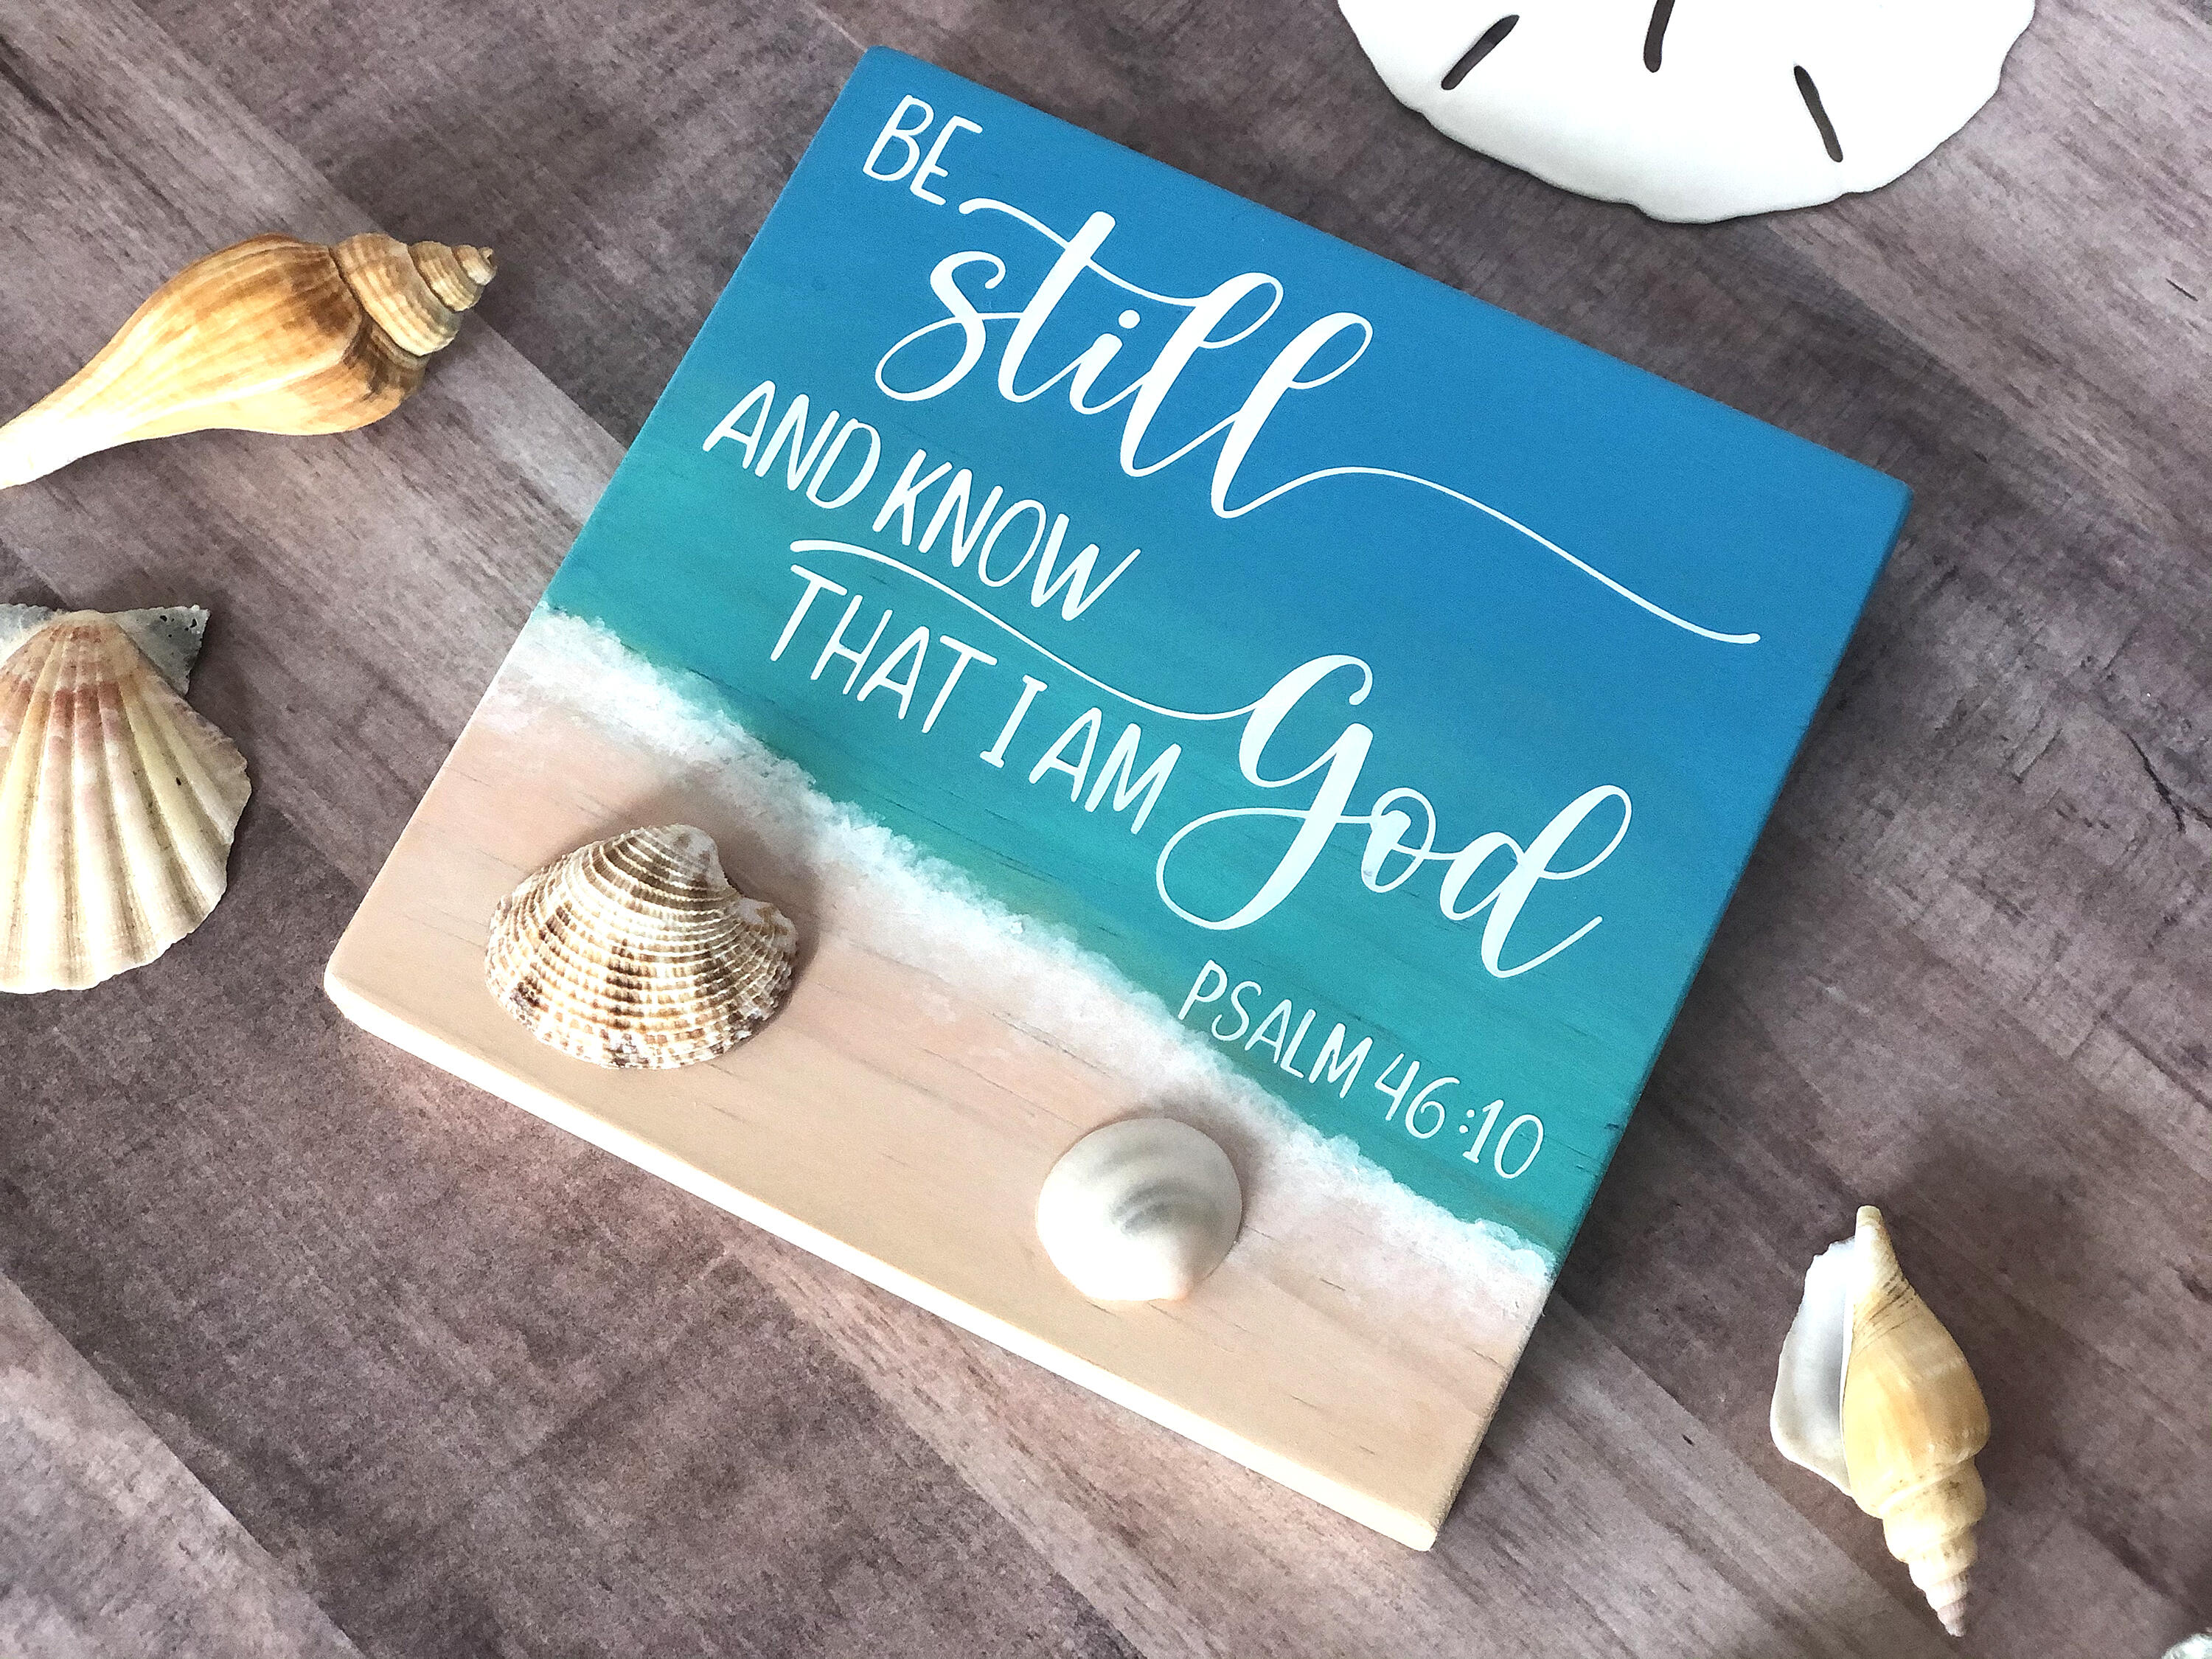 Be Still and Know that I am God, Psalm 46:10 Sign